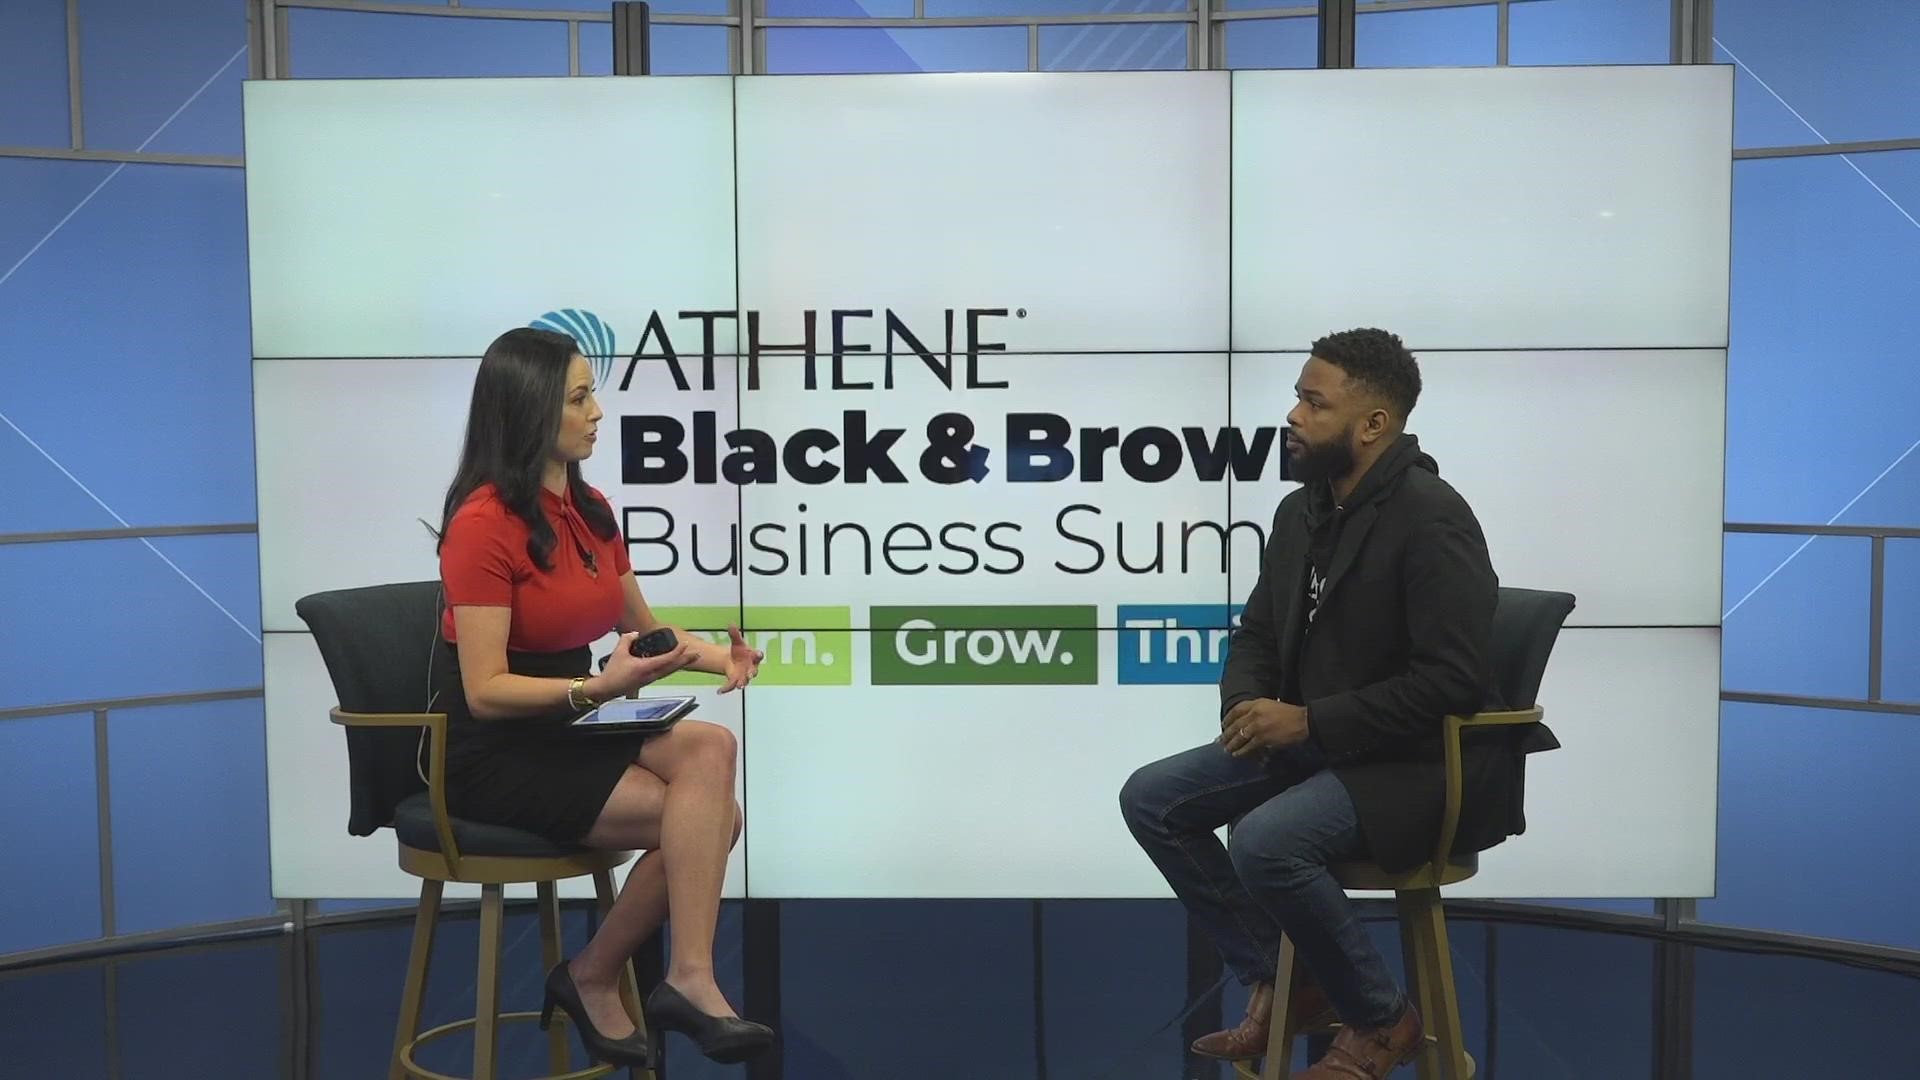 To register for the Athene Black & Brown Business Summit or to apply for the pitch competition, visit wdmchamber.org/bbbsummit